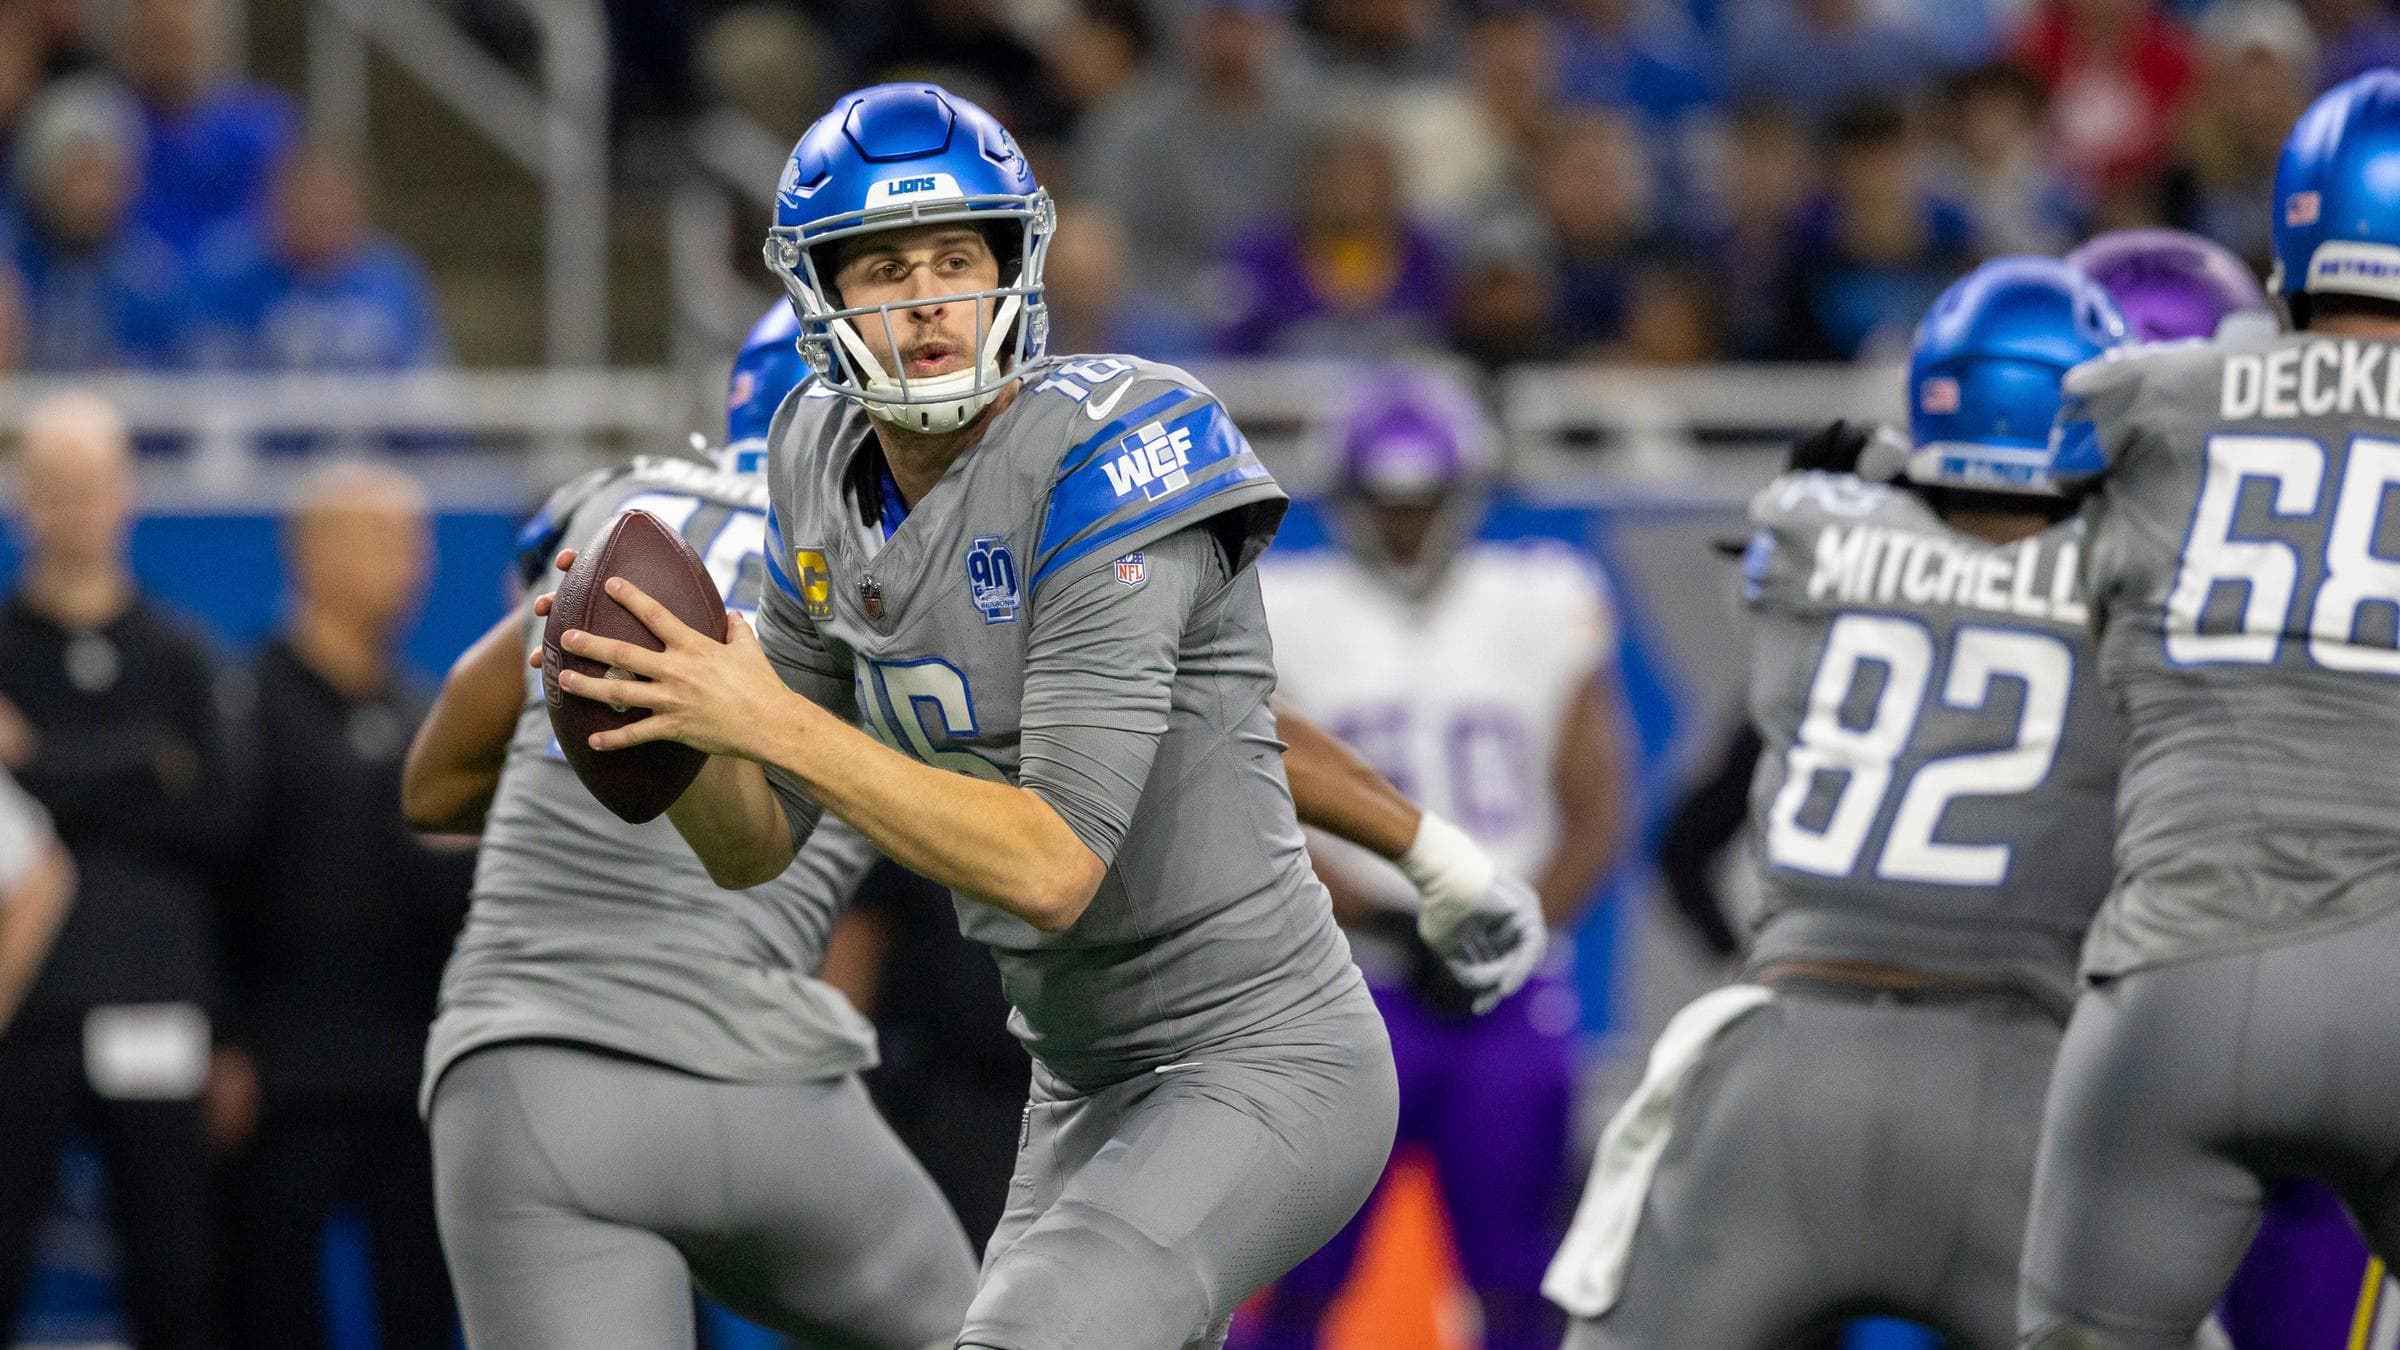 Detroit Lions quarterback Jared Goff attempts pass against the Minnesota Vikings at Ford Field.